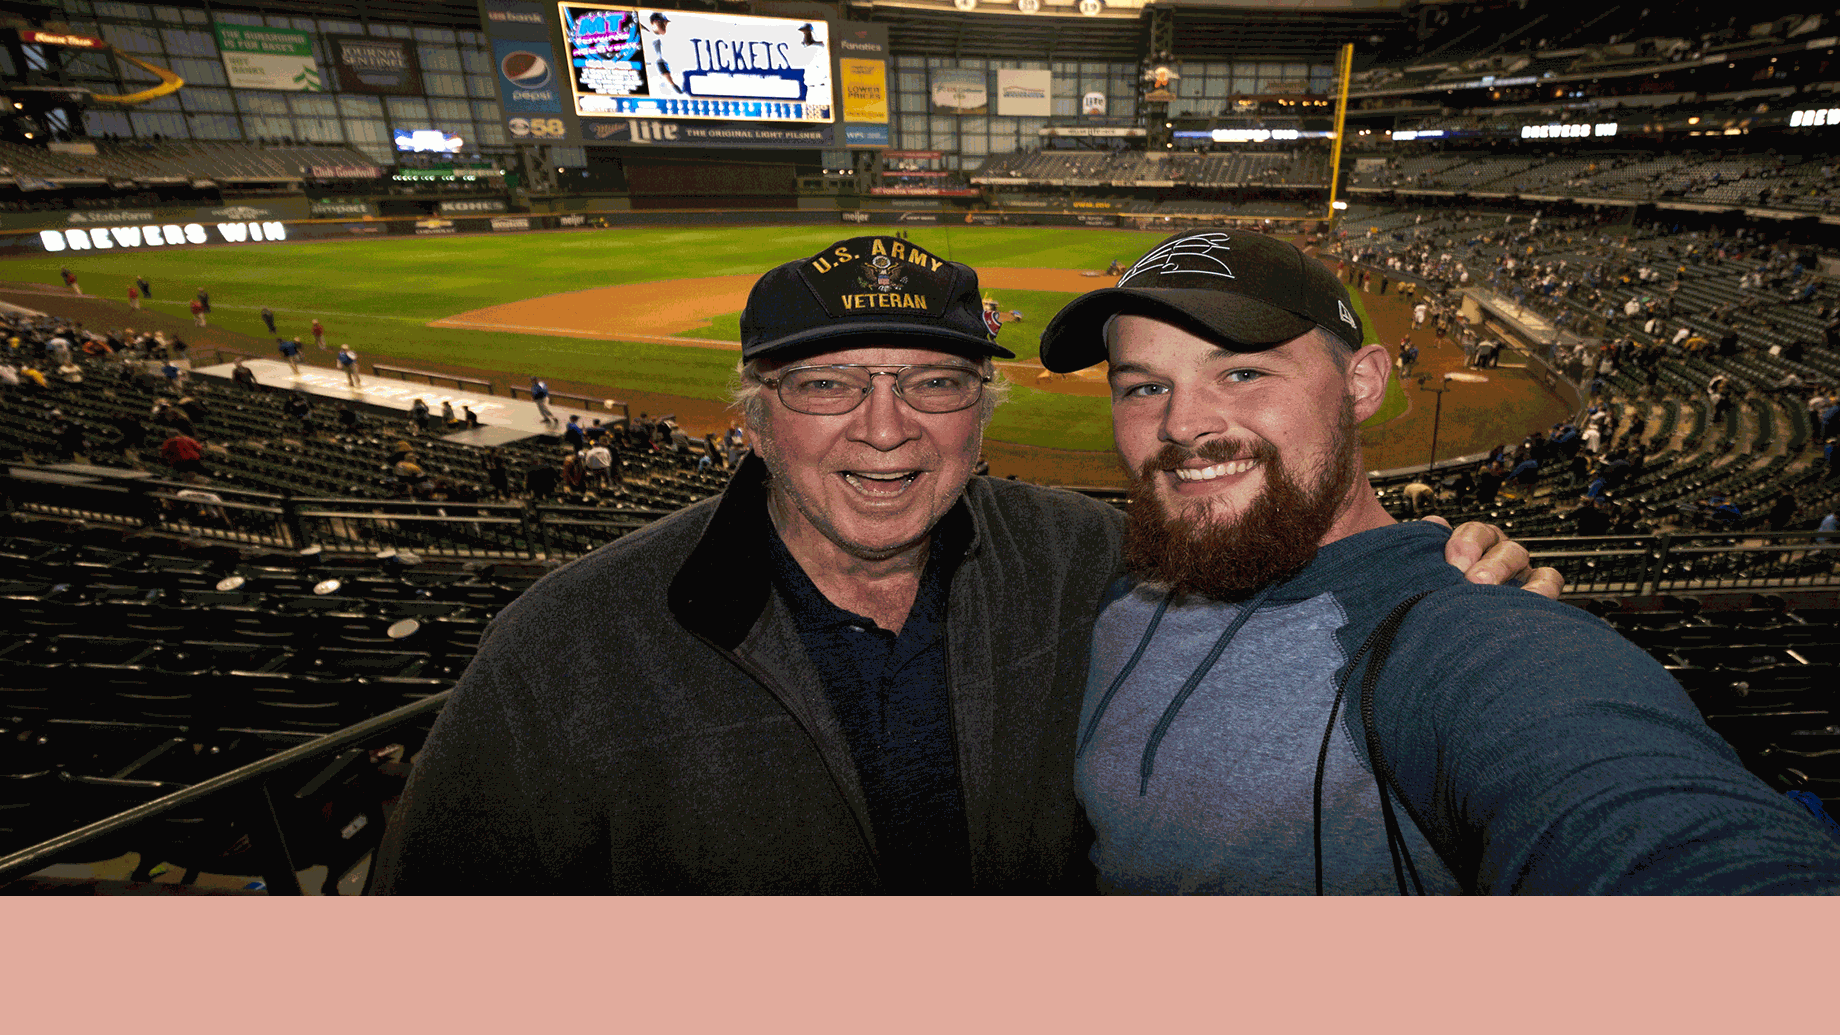 Going back to the ballpark with grandpa, Opinion